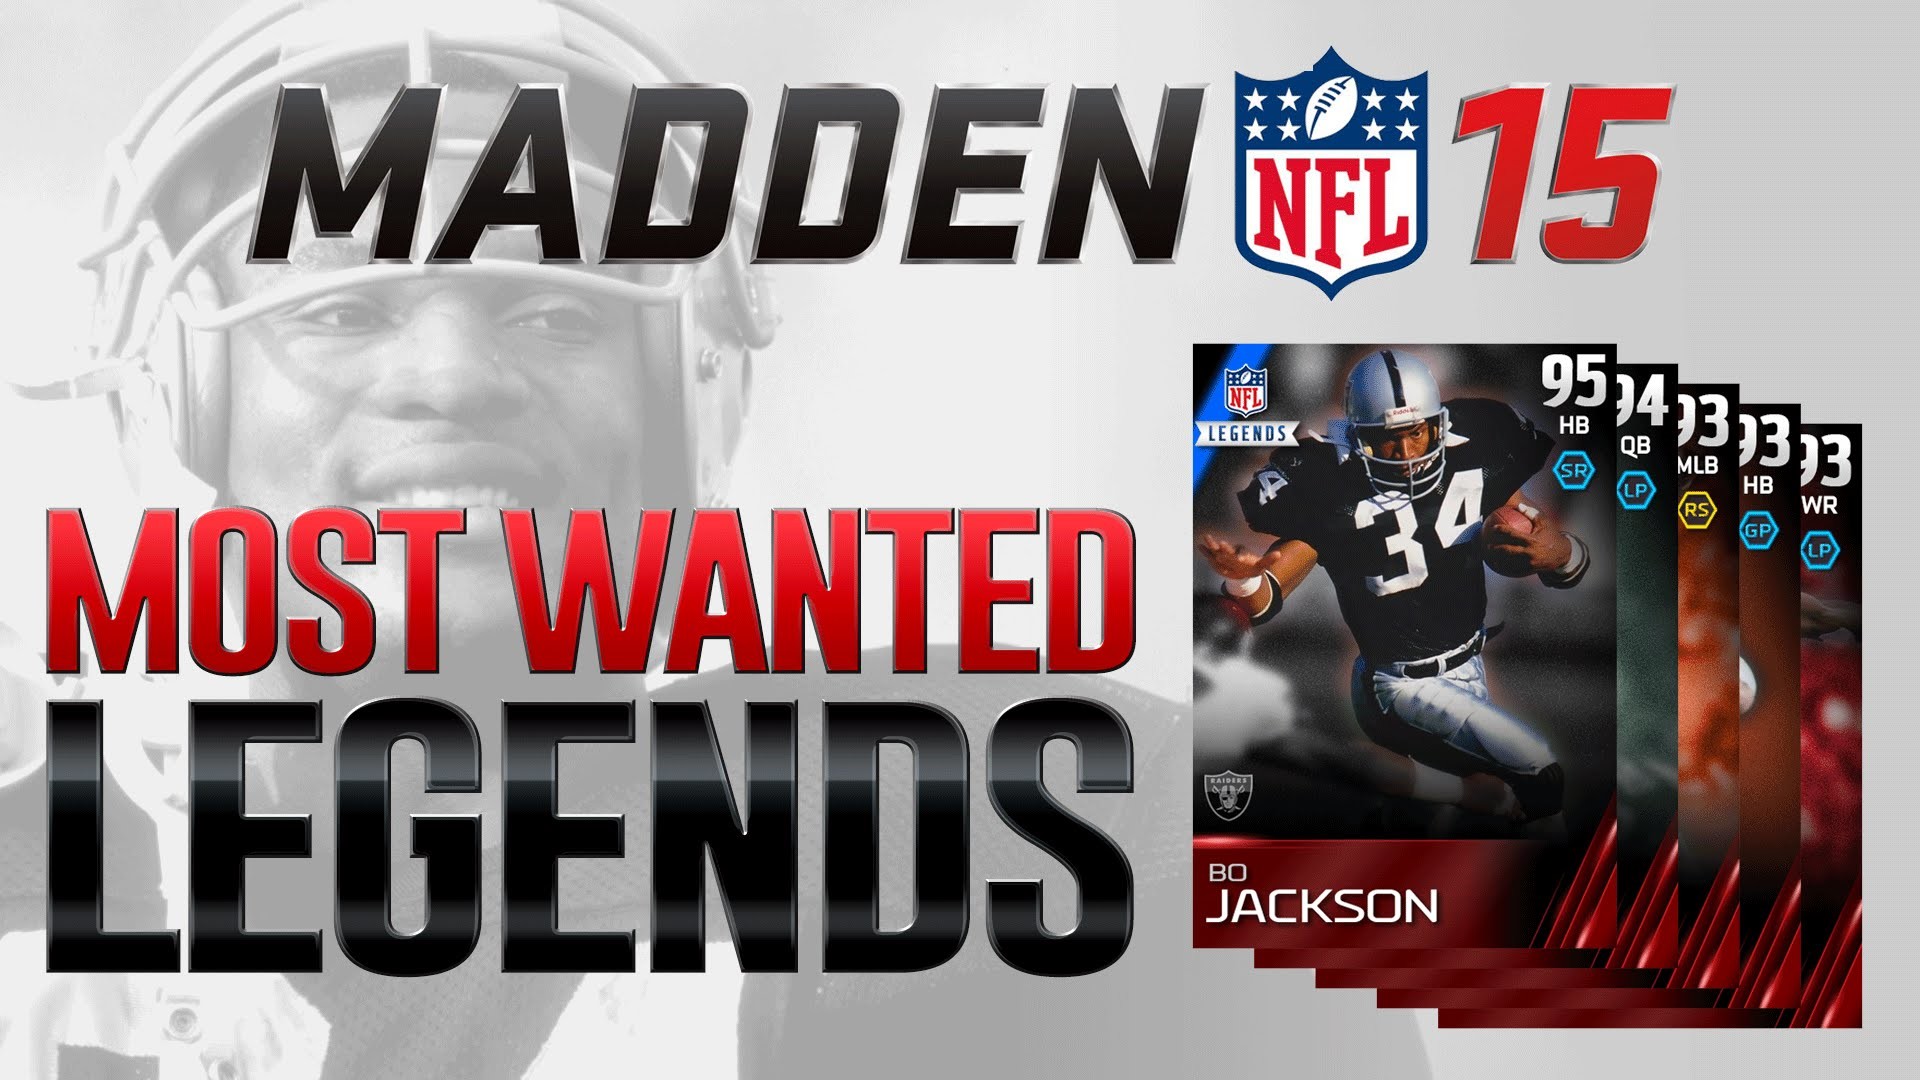 Madden 15 Ultimate Team | Bo Jackson & The Top 5 Most Wanted NFL Legends  for MUT 15!